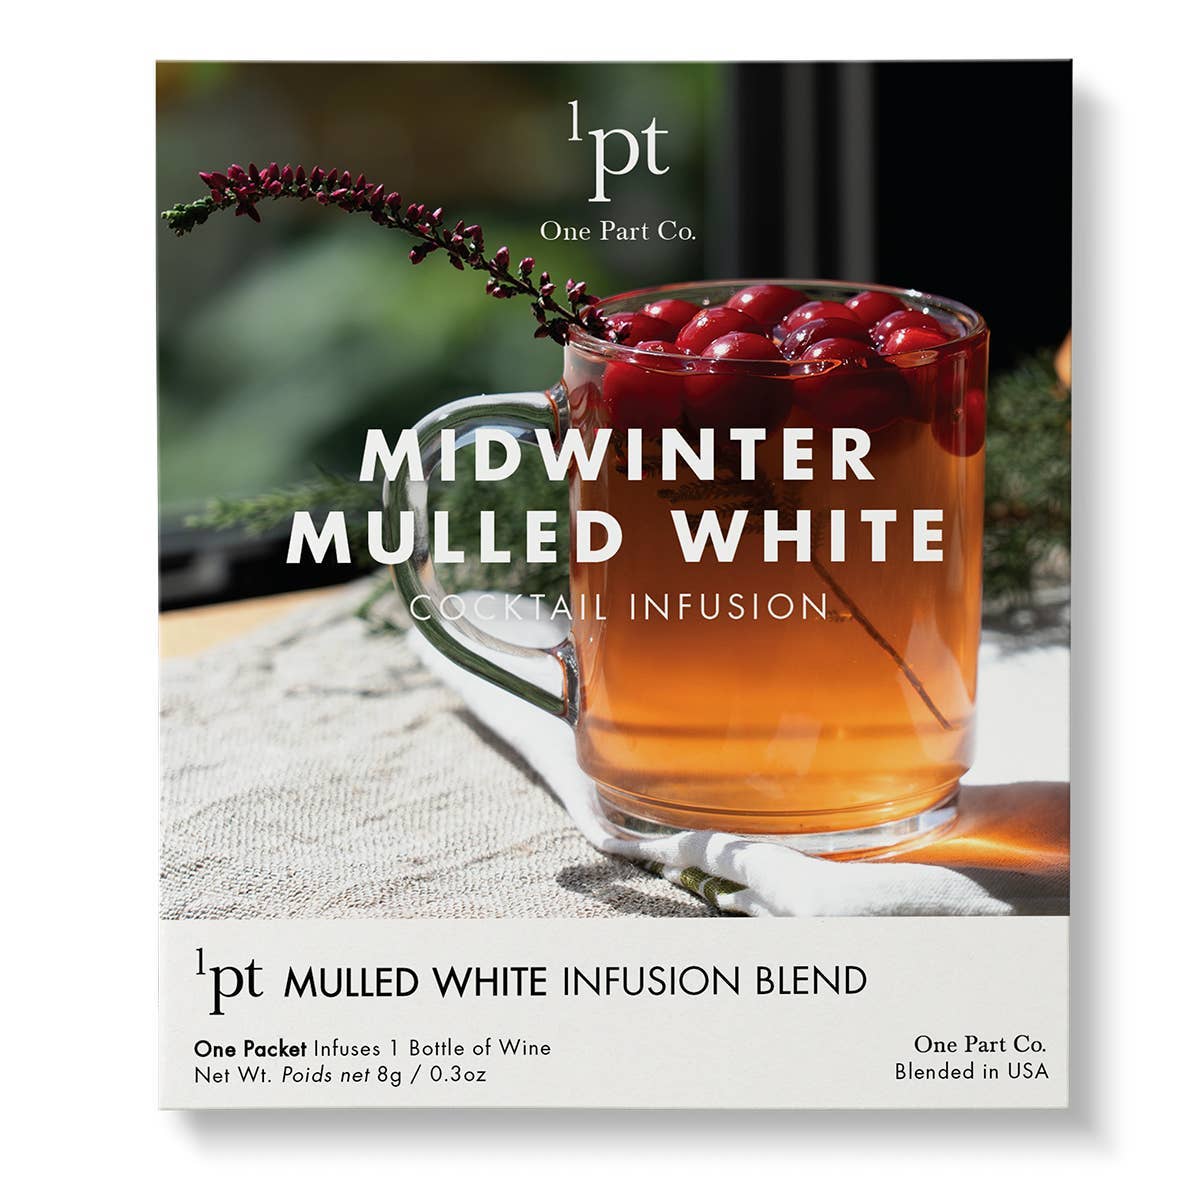 1pt Midwinter Mulled White Cocktail Pack